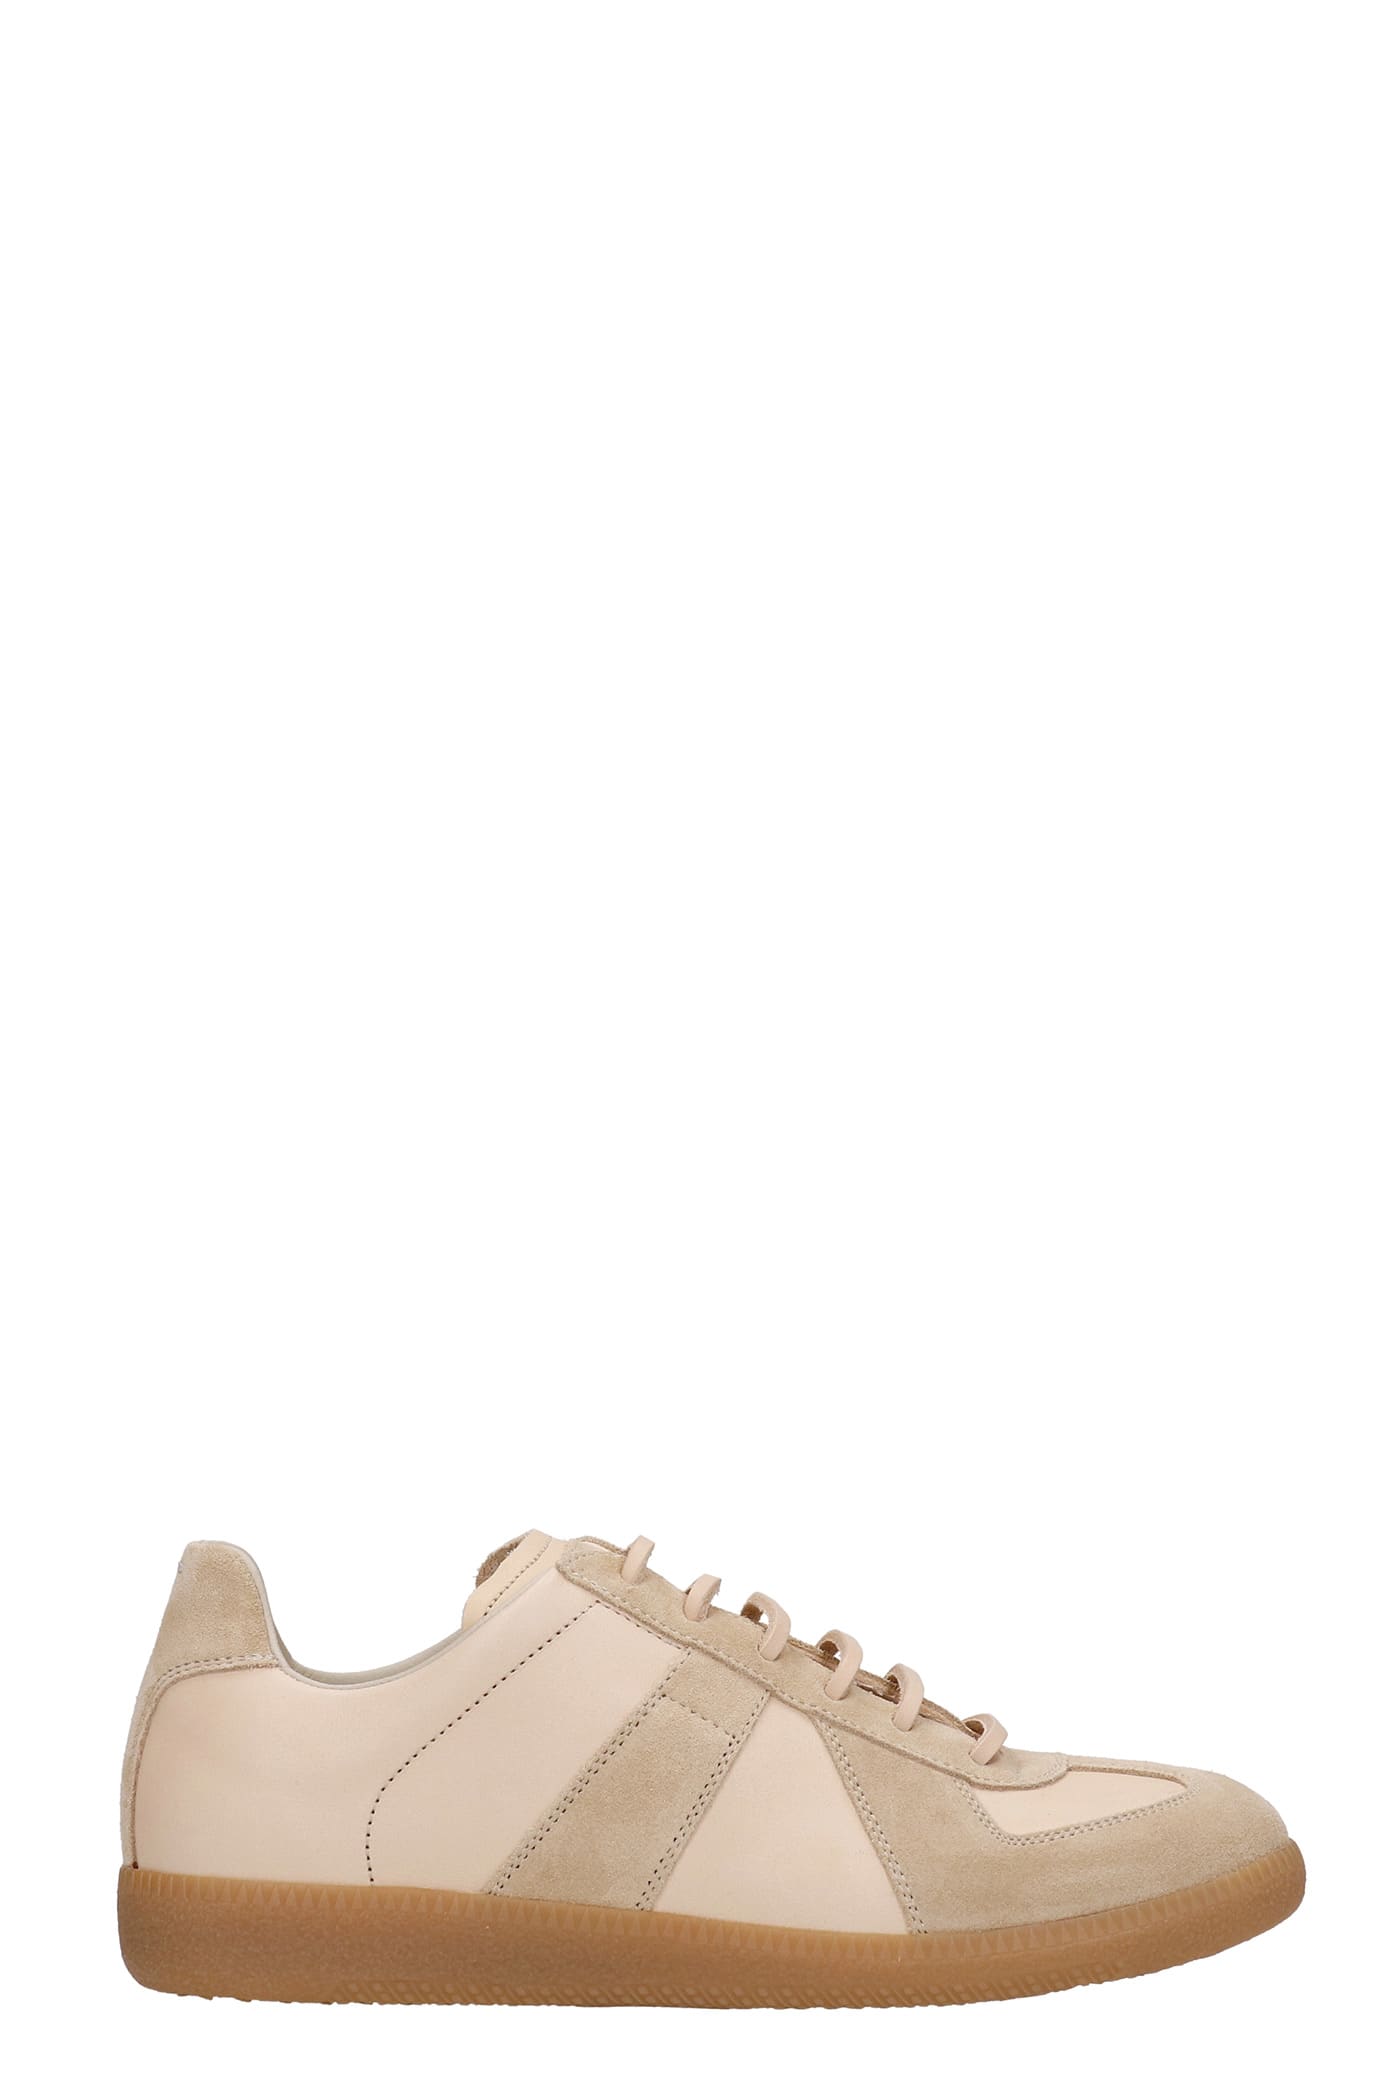 Maison Margiela Replica Sneakers In Powder Suede And Leather